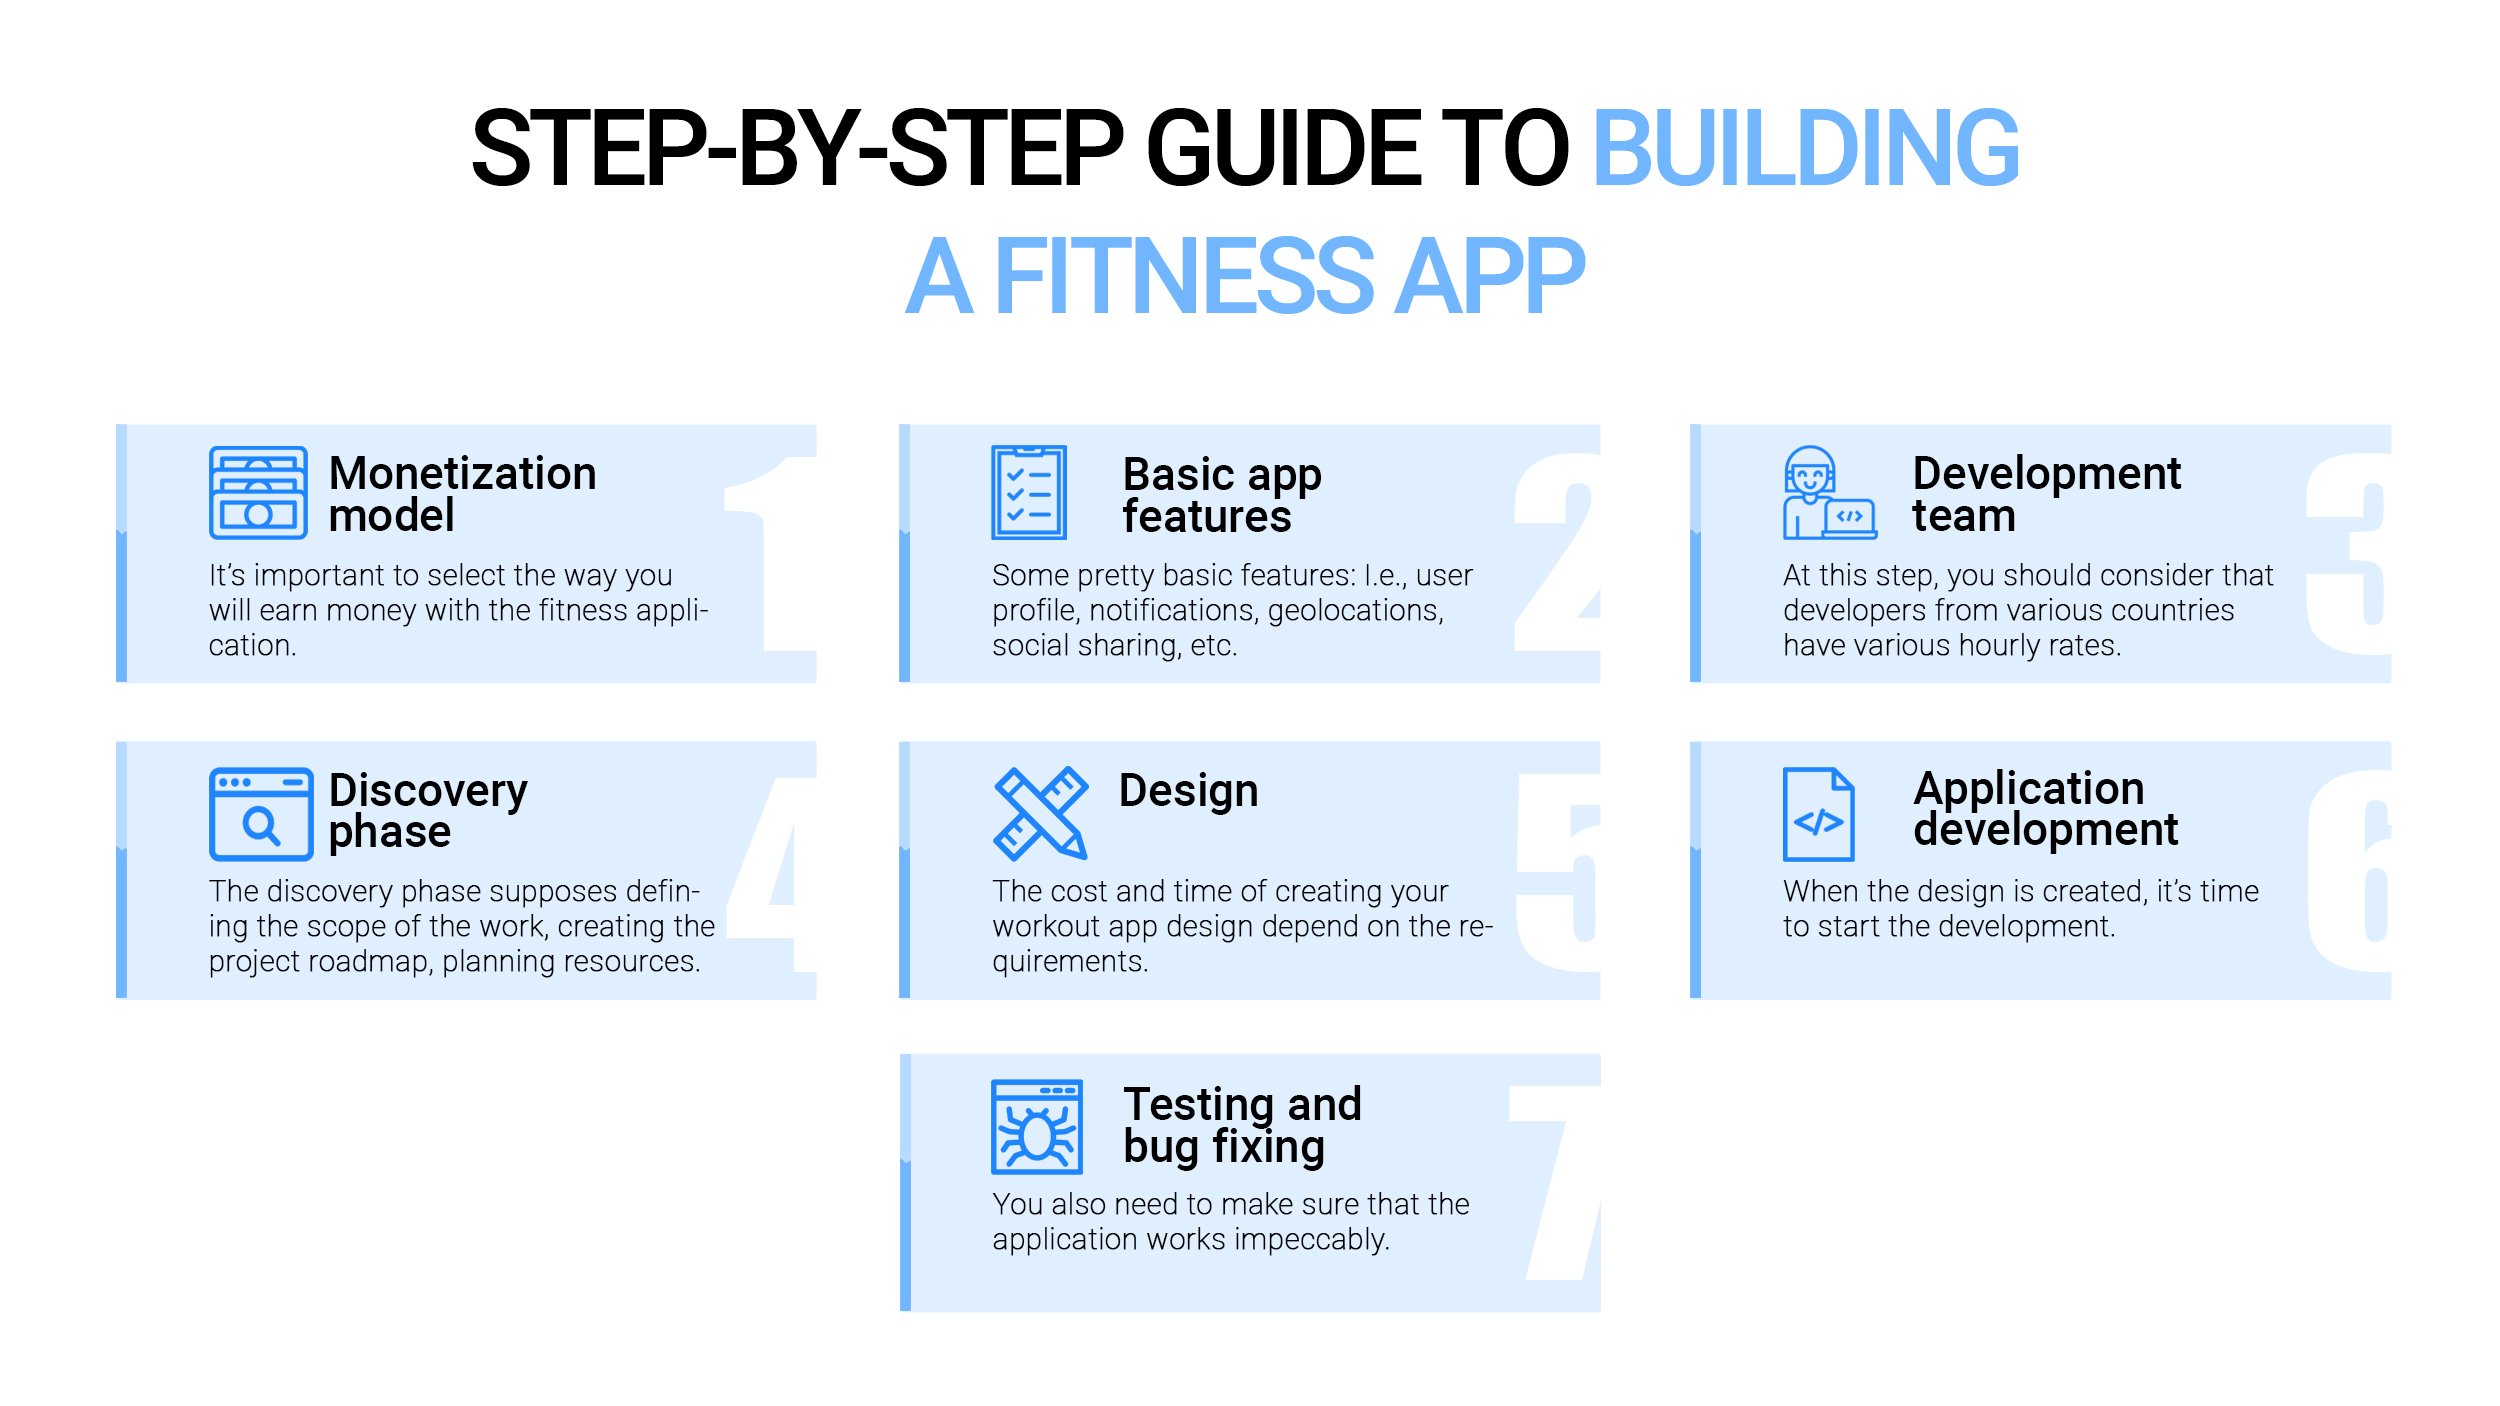 How to develop a fitness app